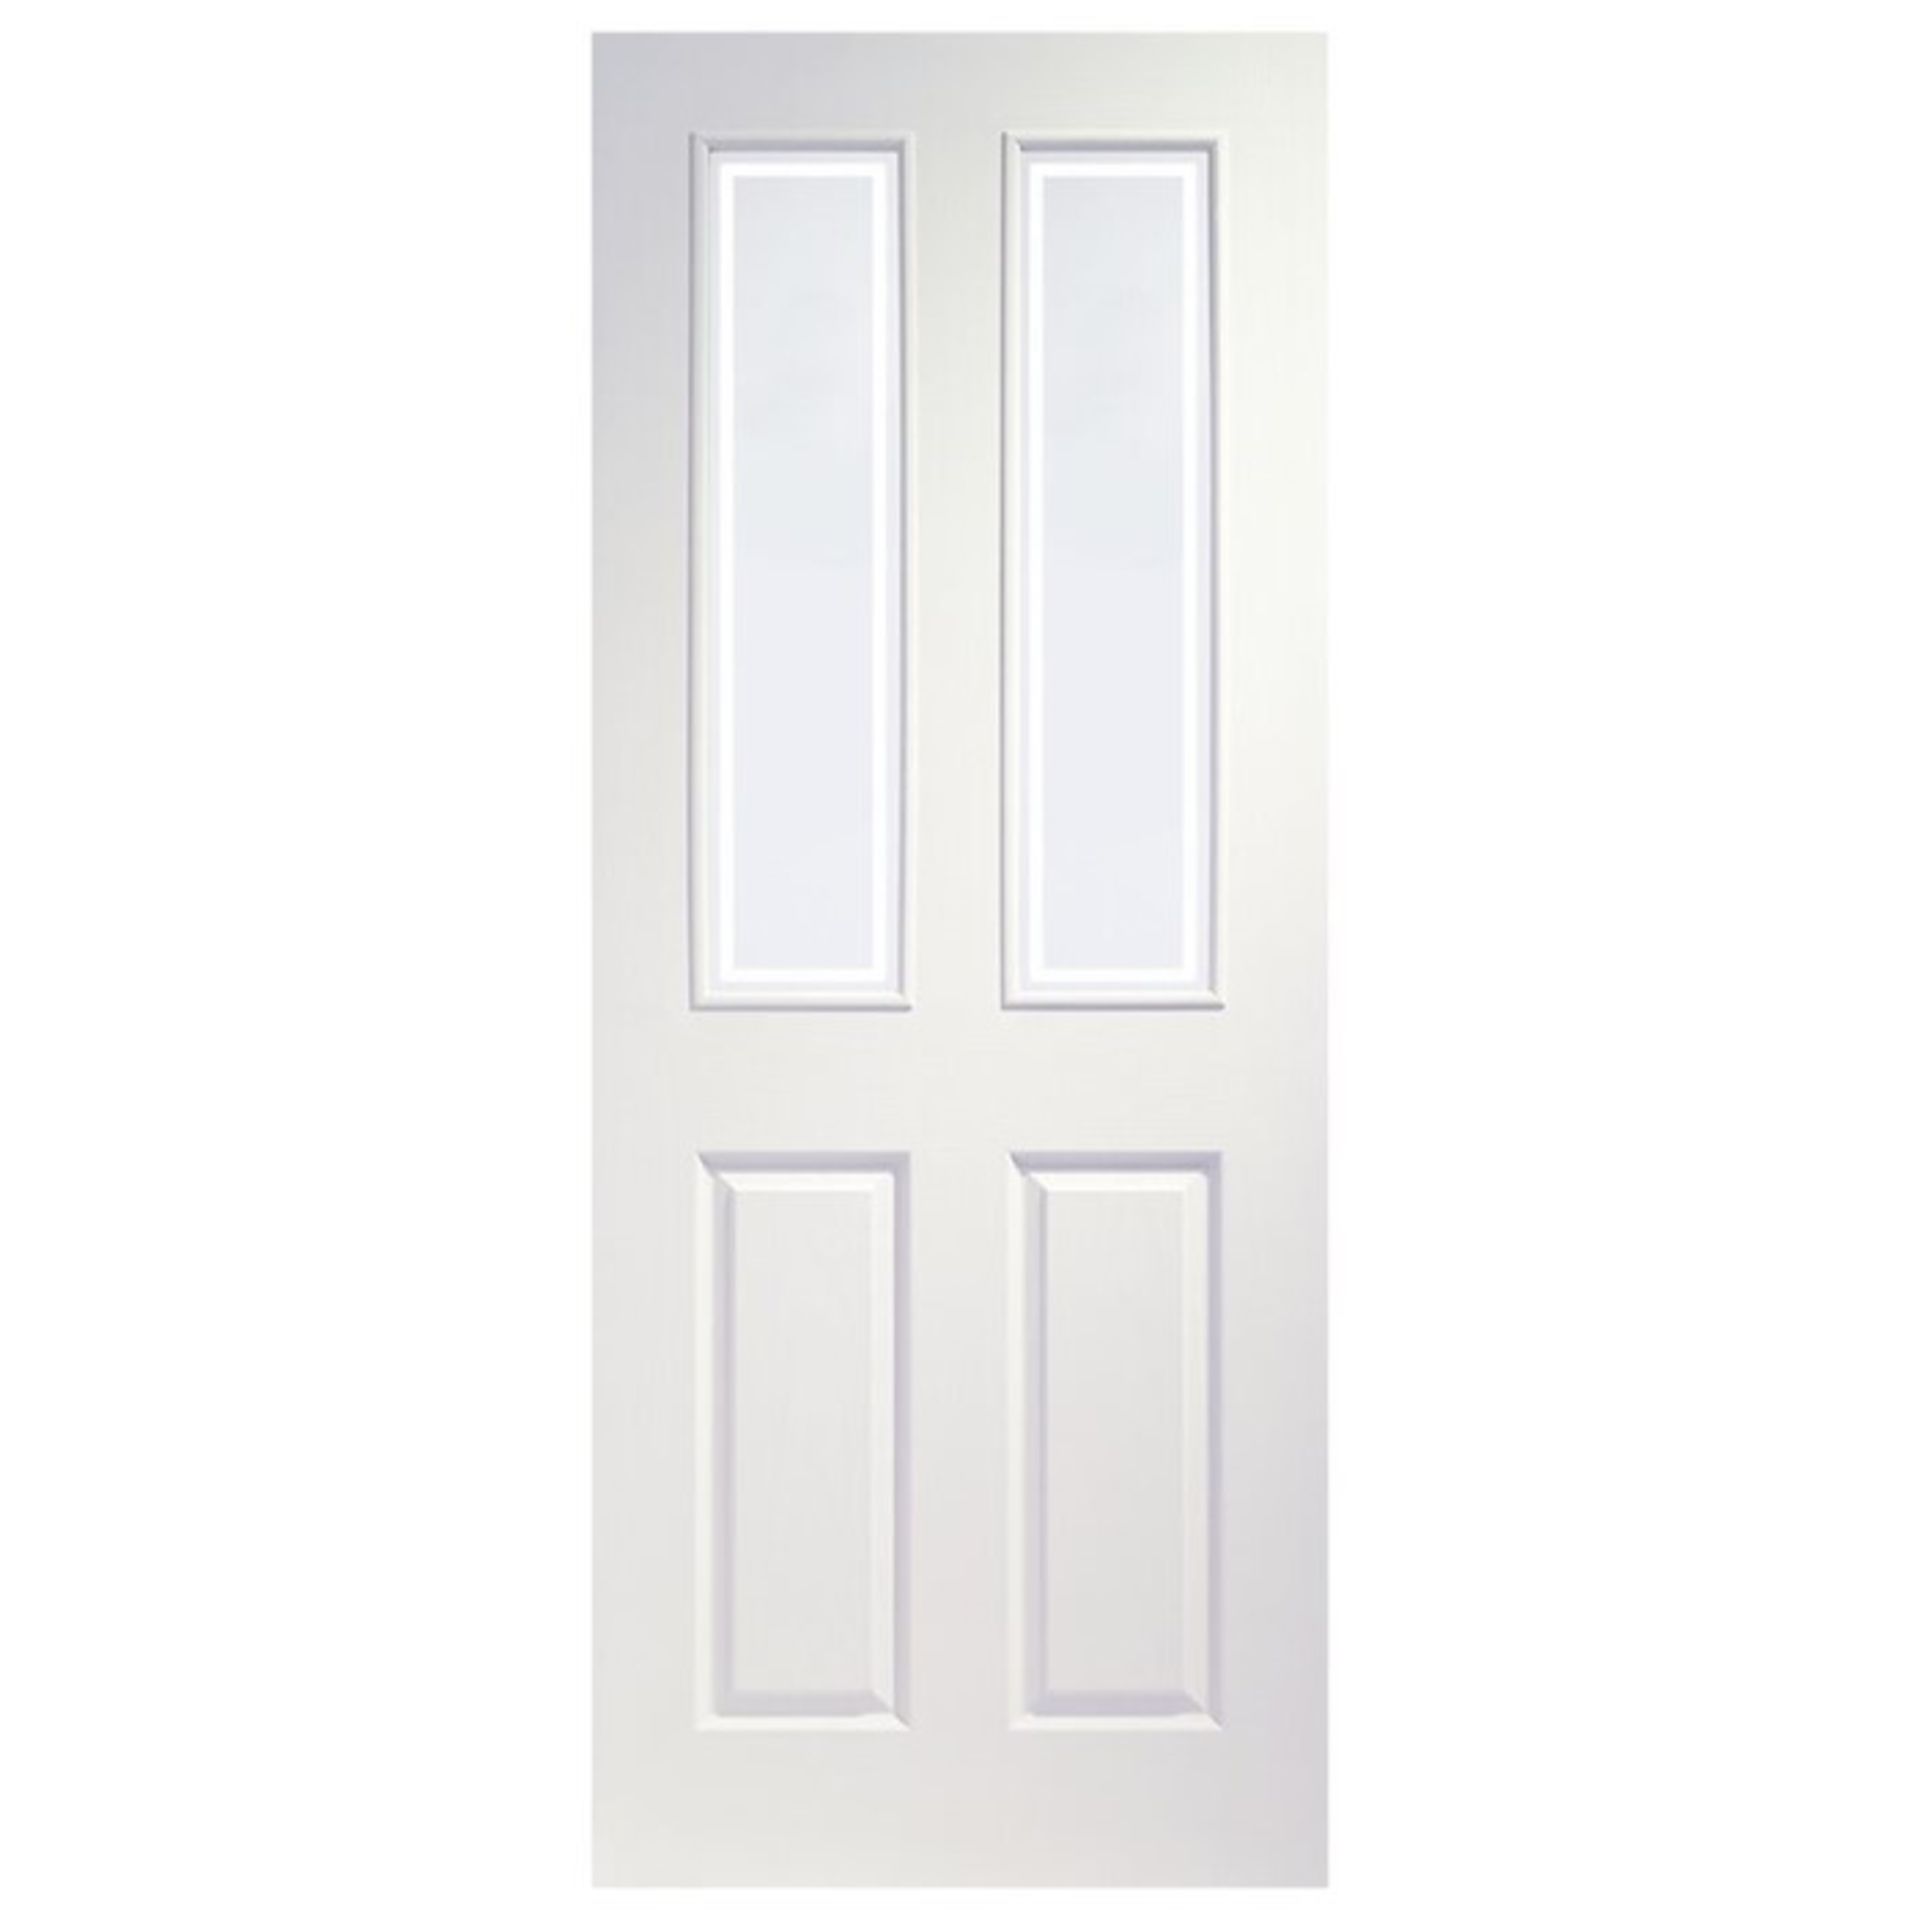 XL Joinery,Victorian Internal Door Unfinished RRP -£114.99(79 X 30.5 INCH)(20574/8 -SDJD1393) (78